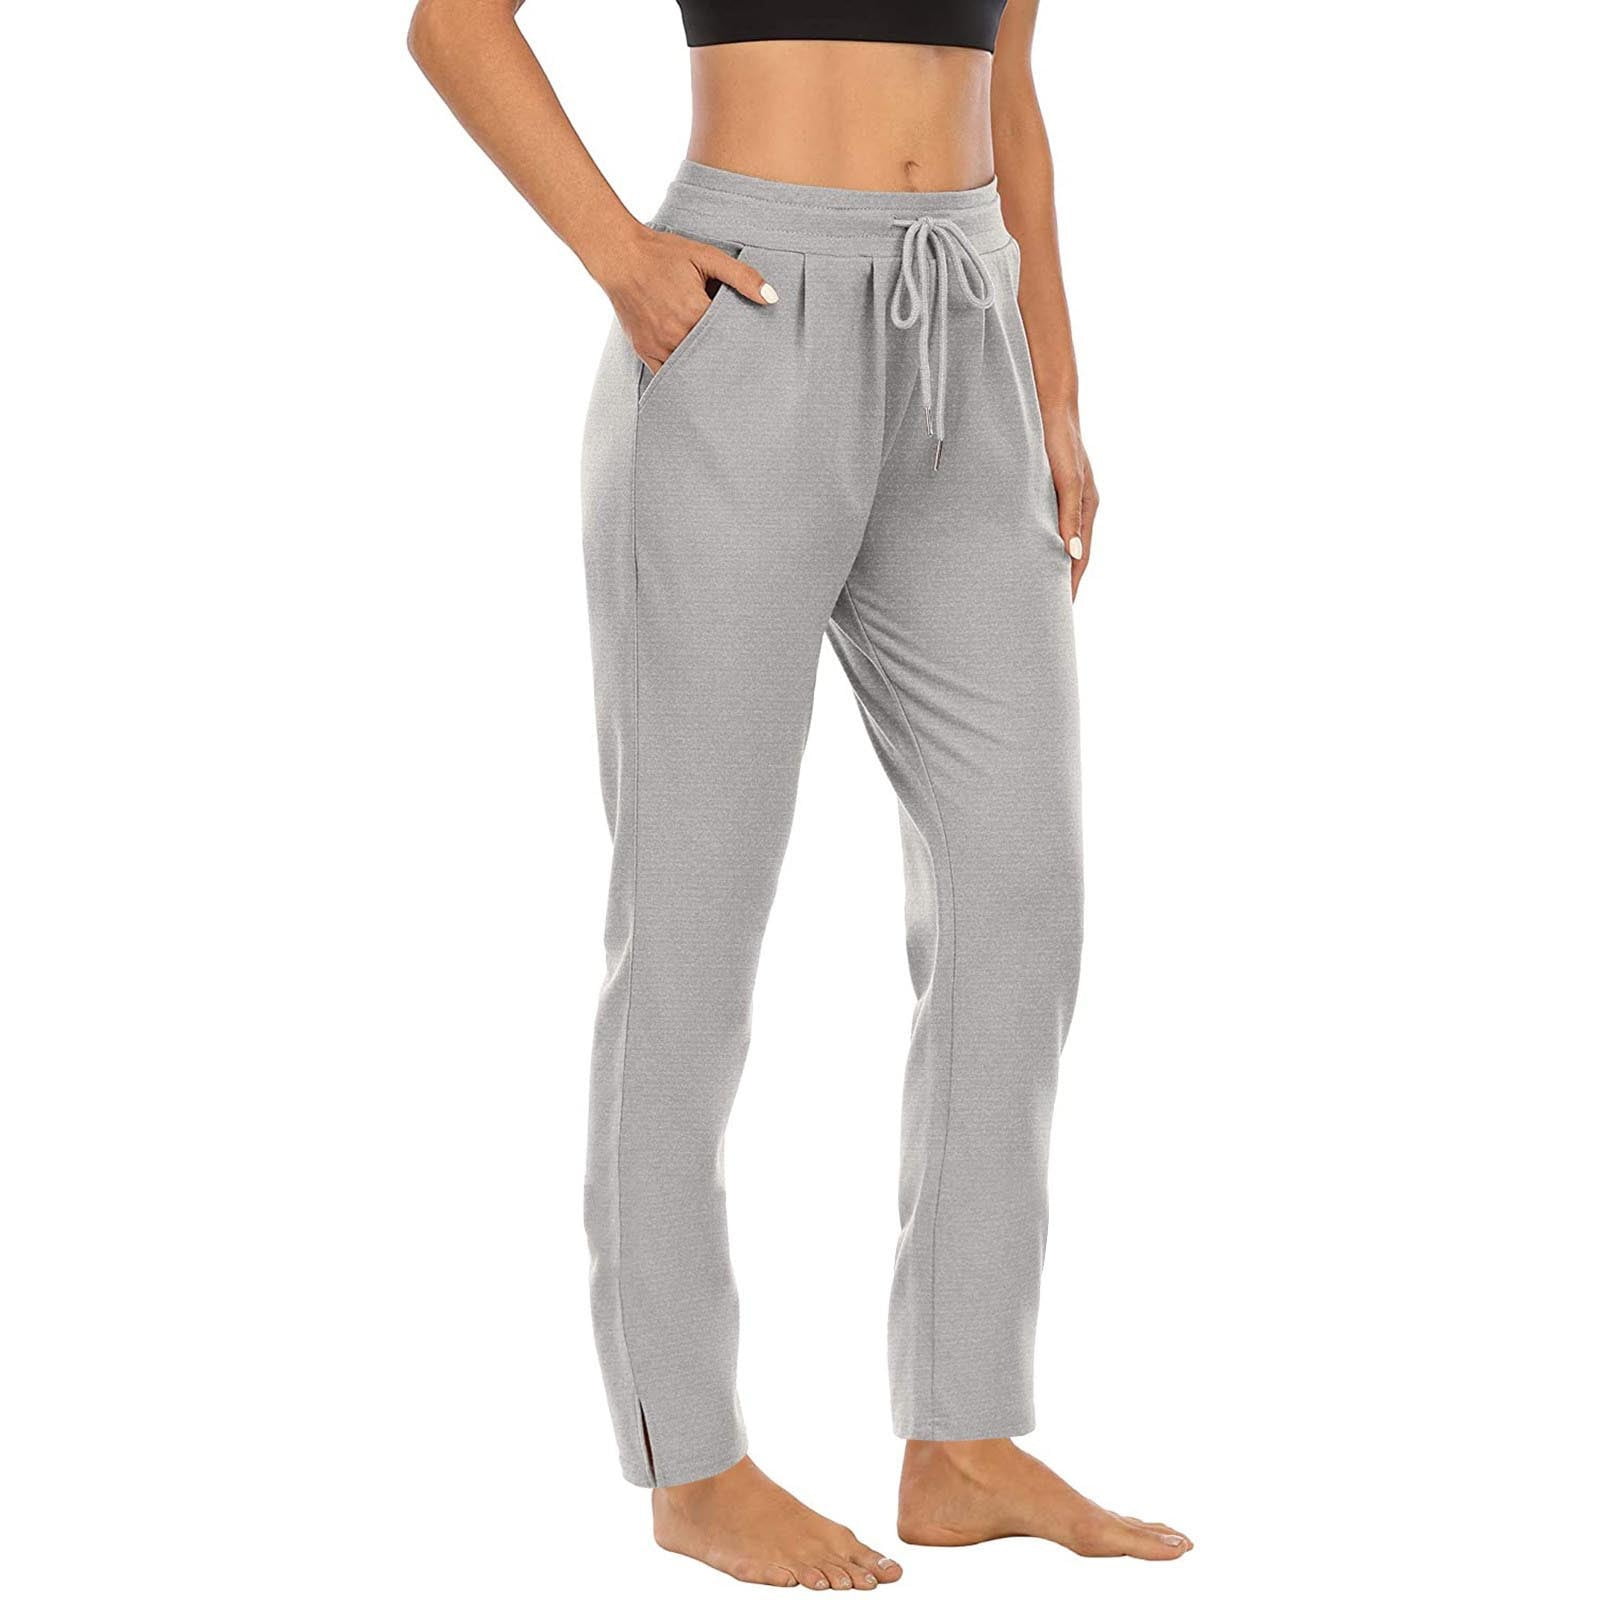 Funicet Women's Jogger Track Sweatpants with Pockets for Yoga, Workout ...